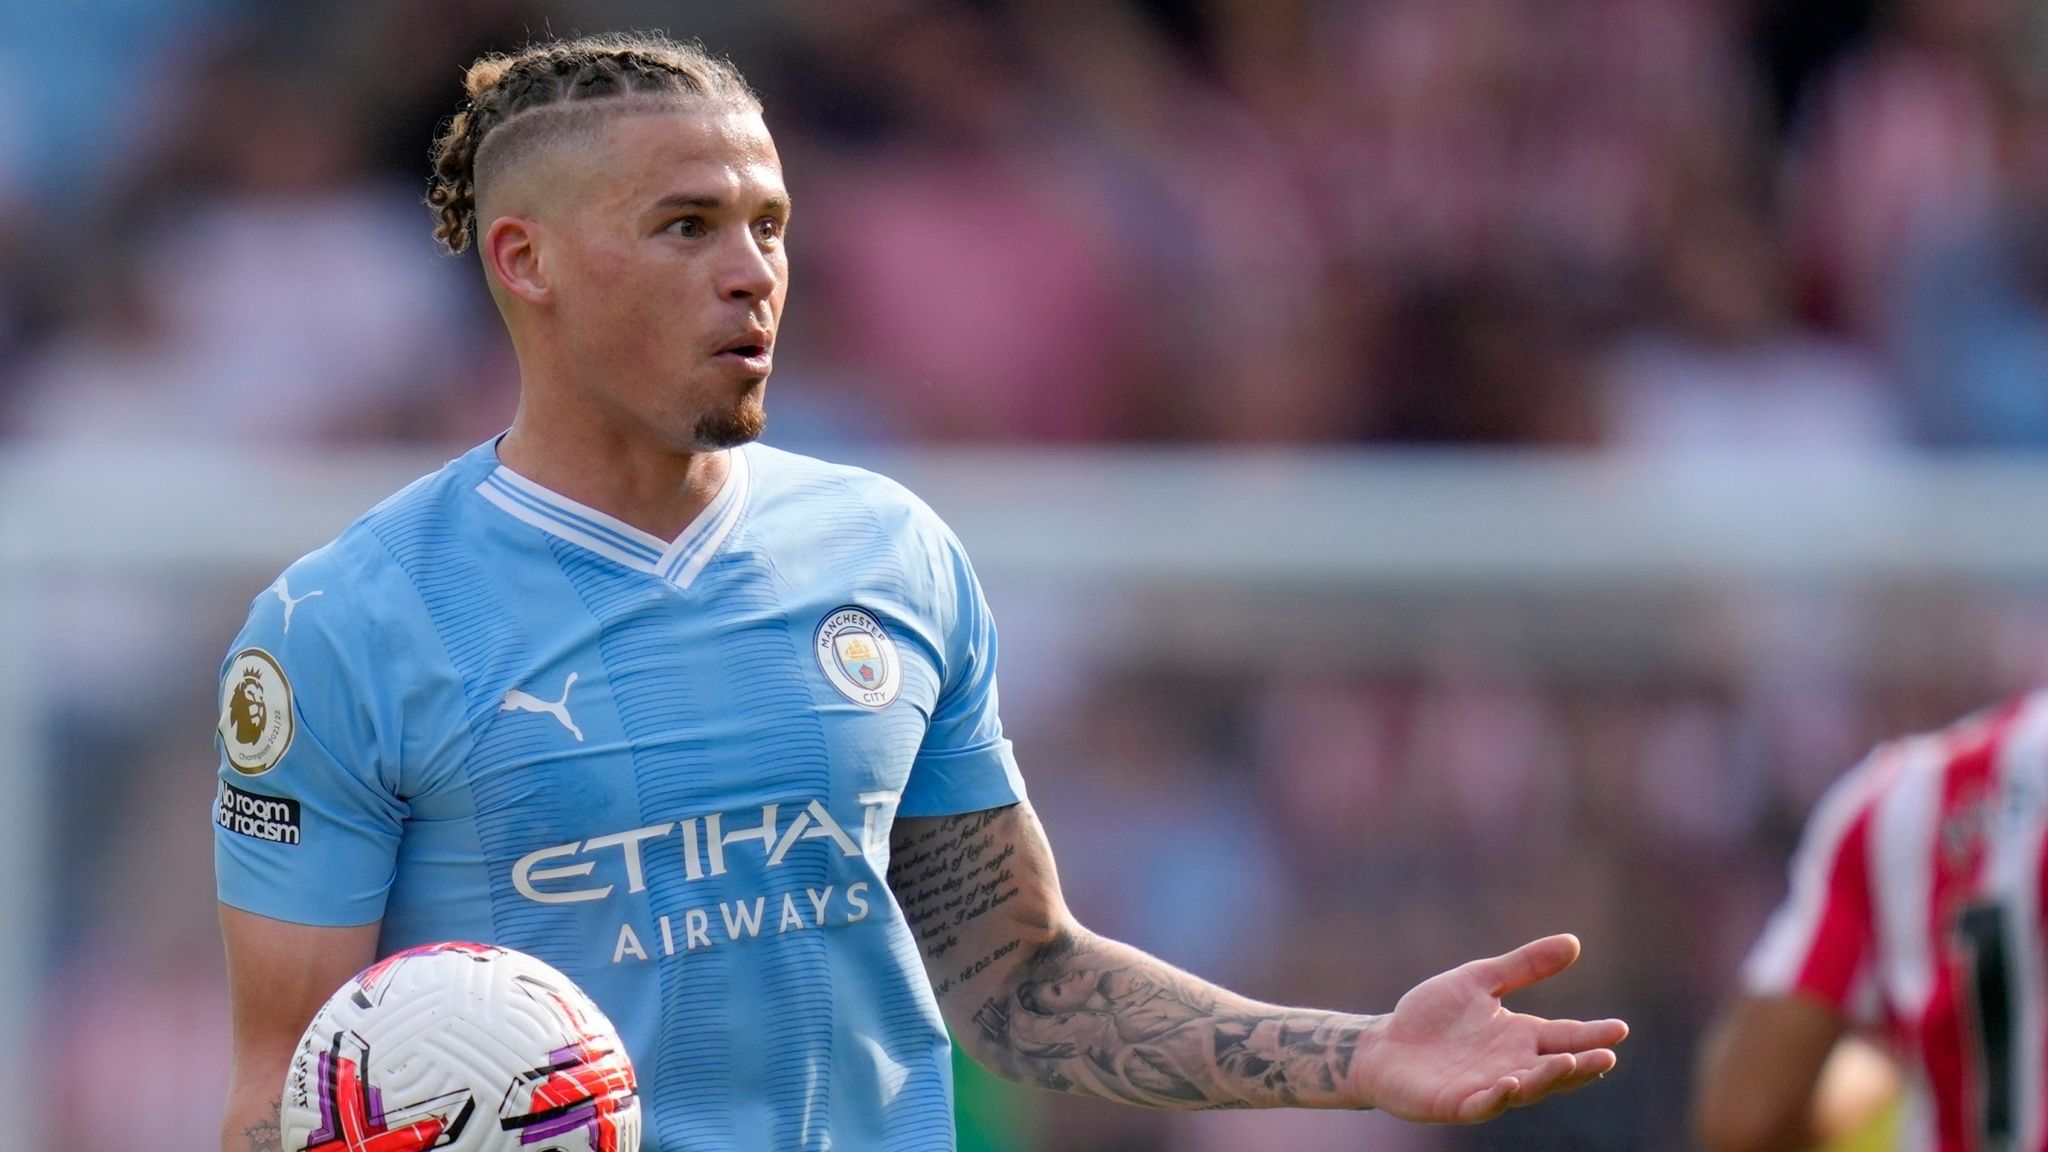 Guardiola Apologizes to Kalvin Phillips for Comments on His Weight